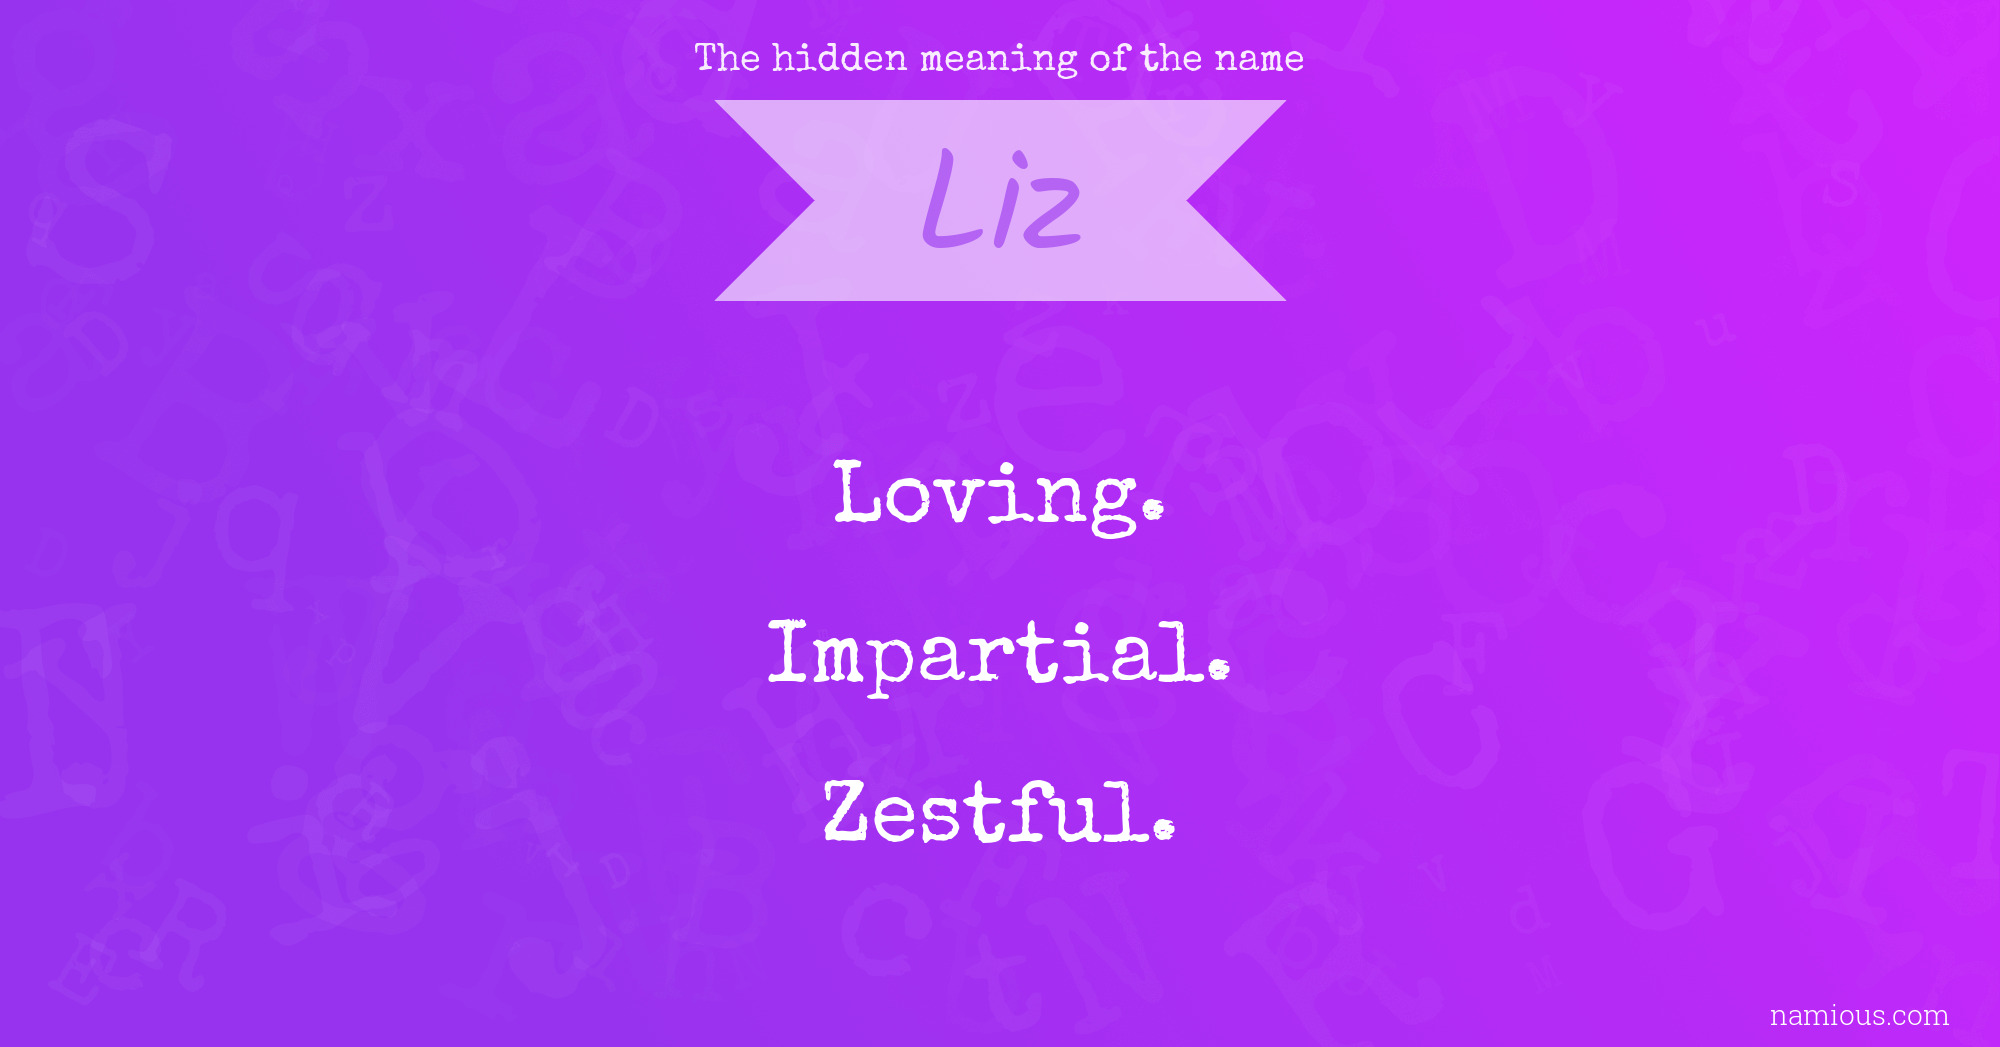 The hidden meaning of the name Liz